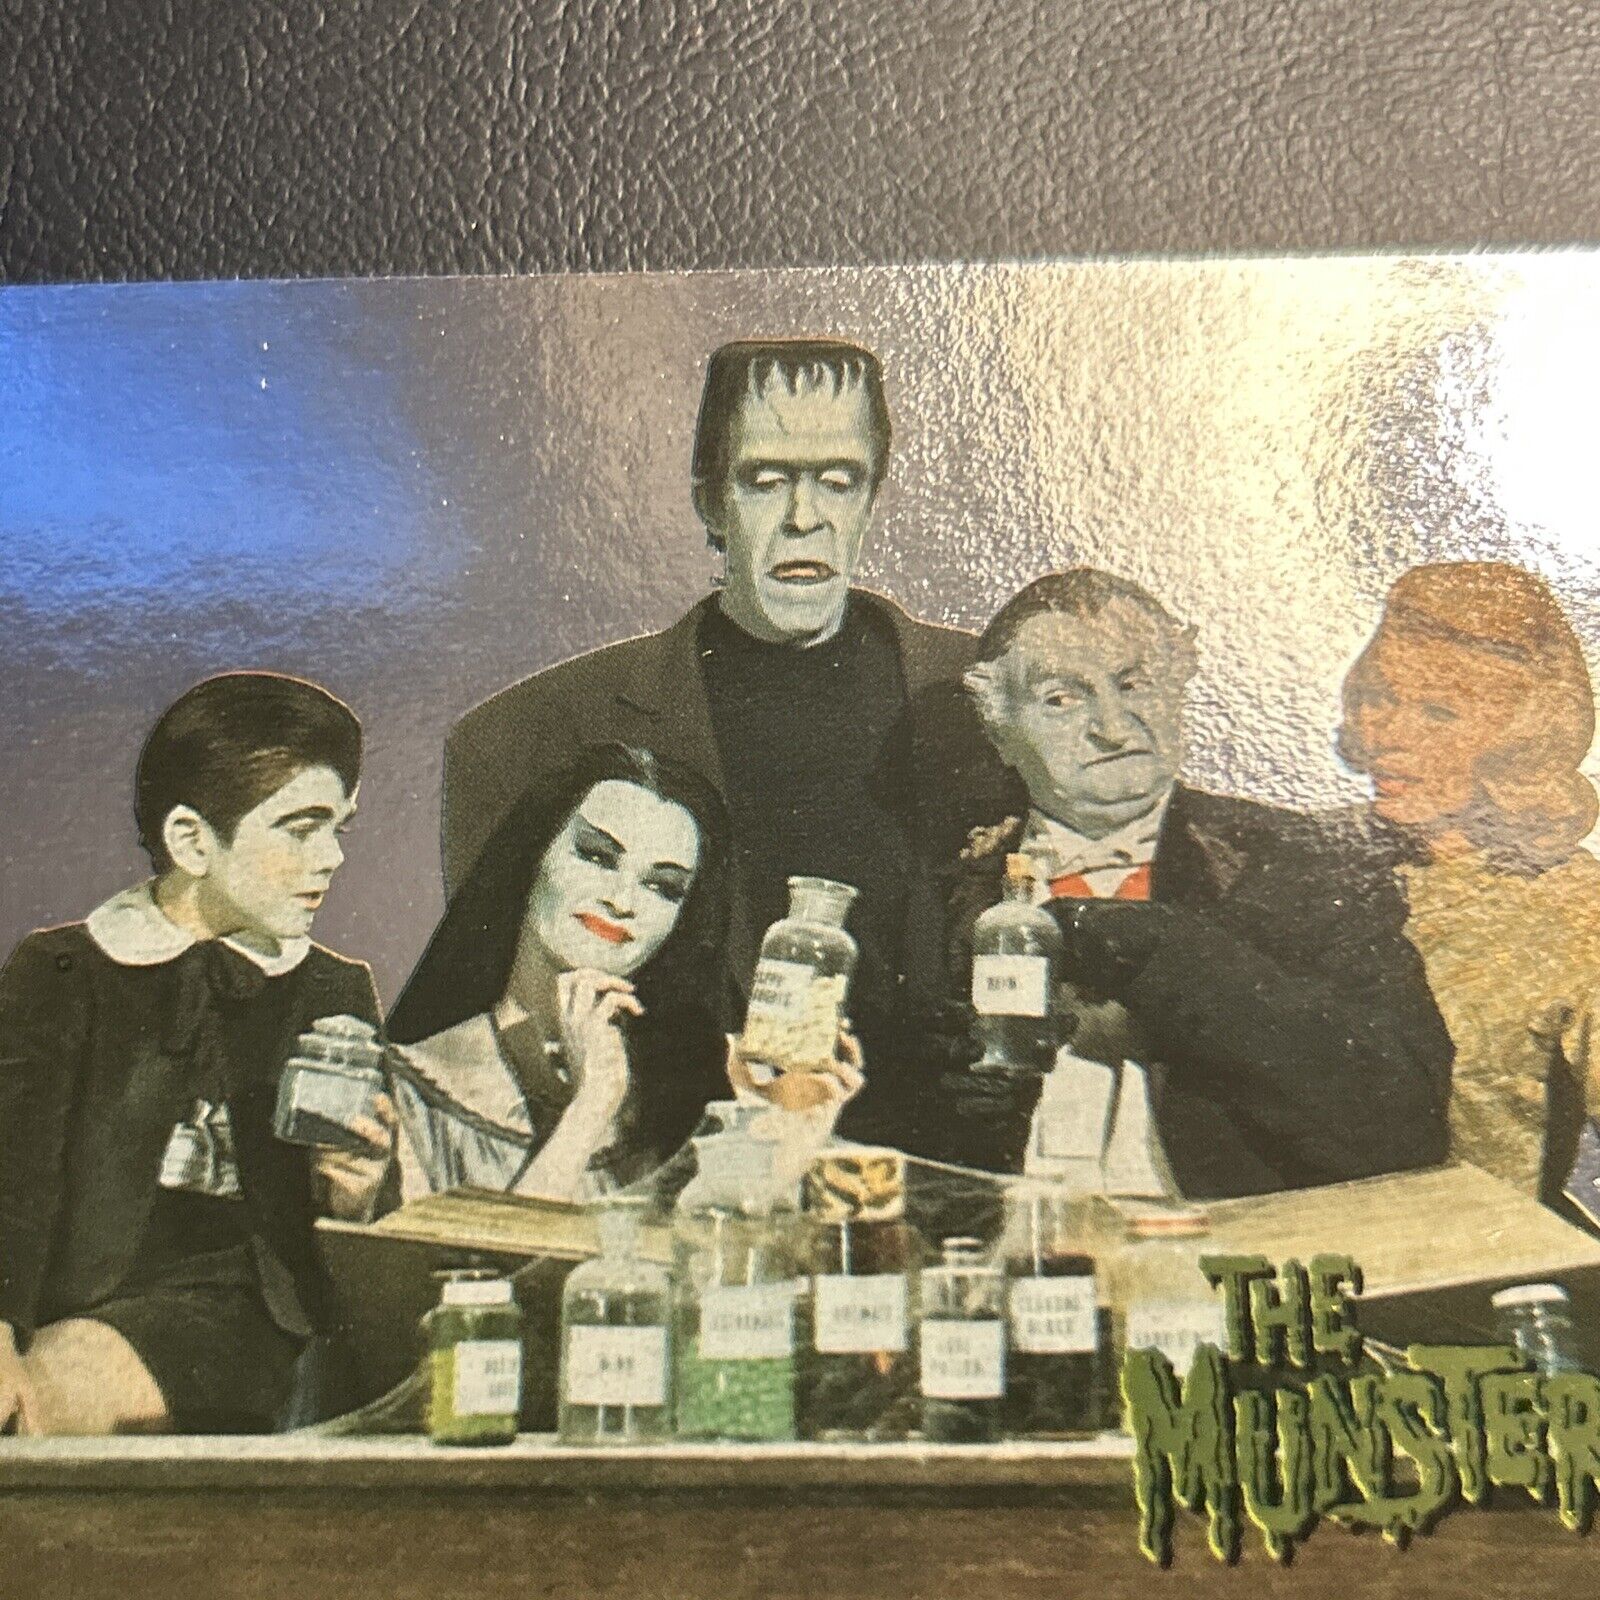 Jb3c The Munsters Deluxe Collection 1996 #25 Trivia Monsters, Family herman lily